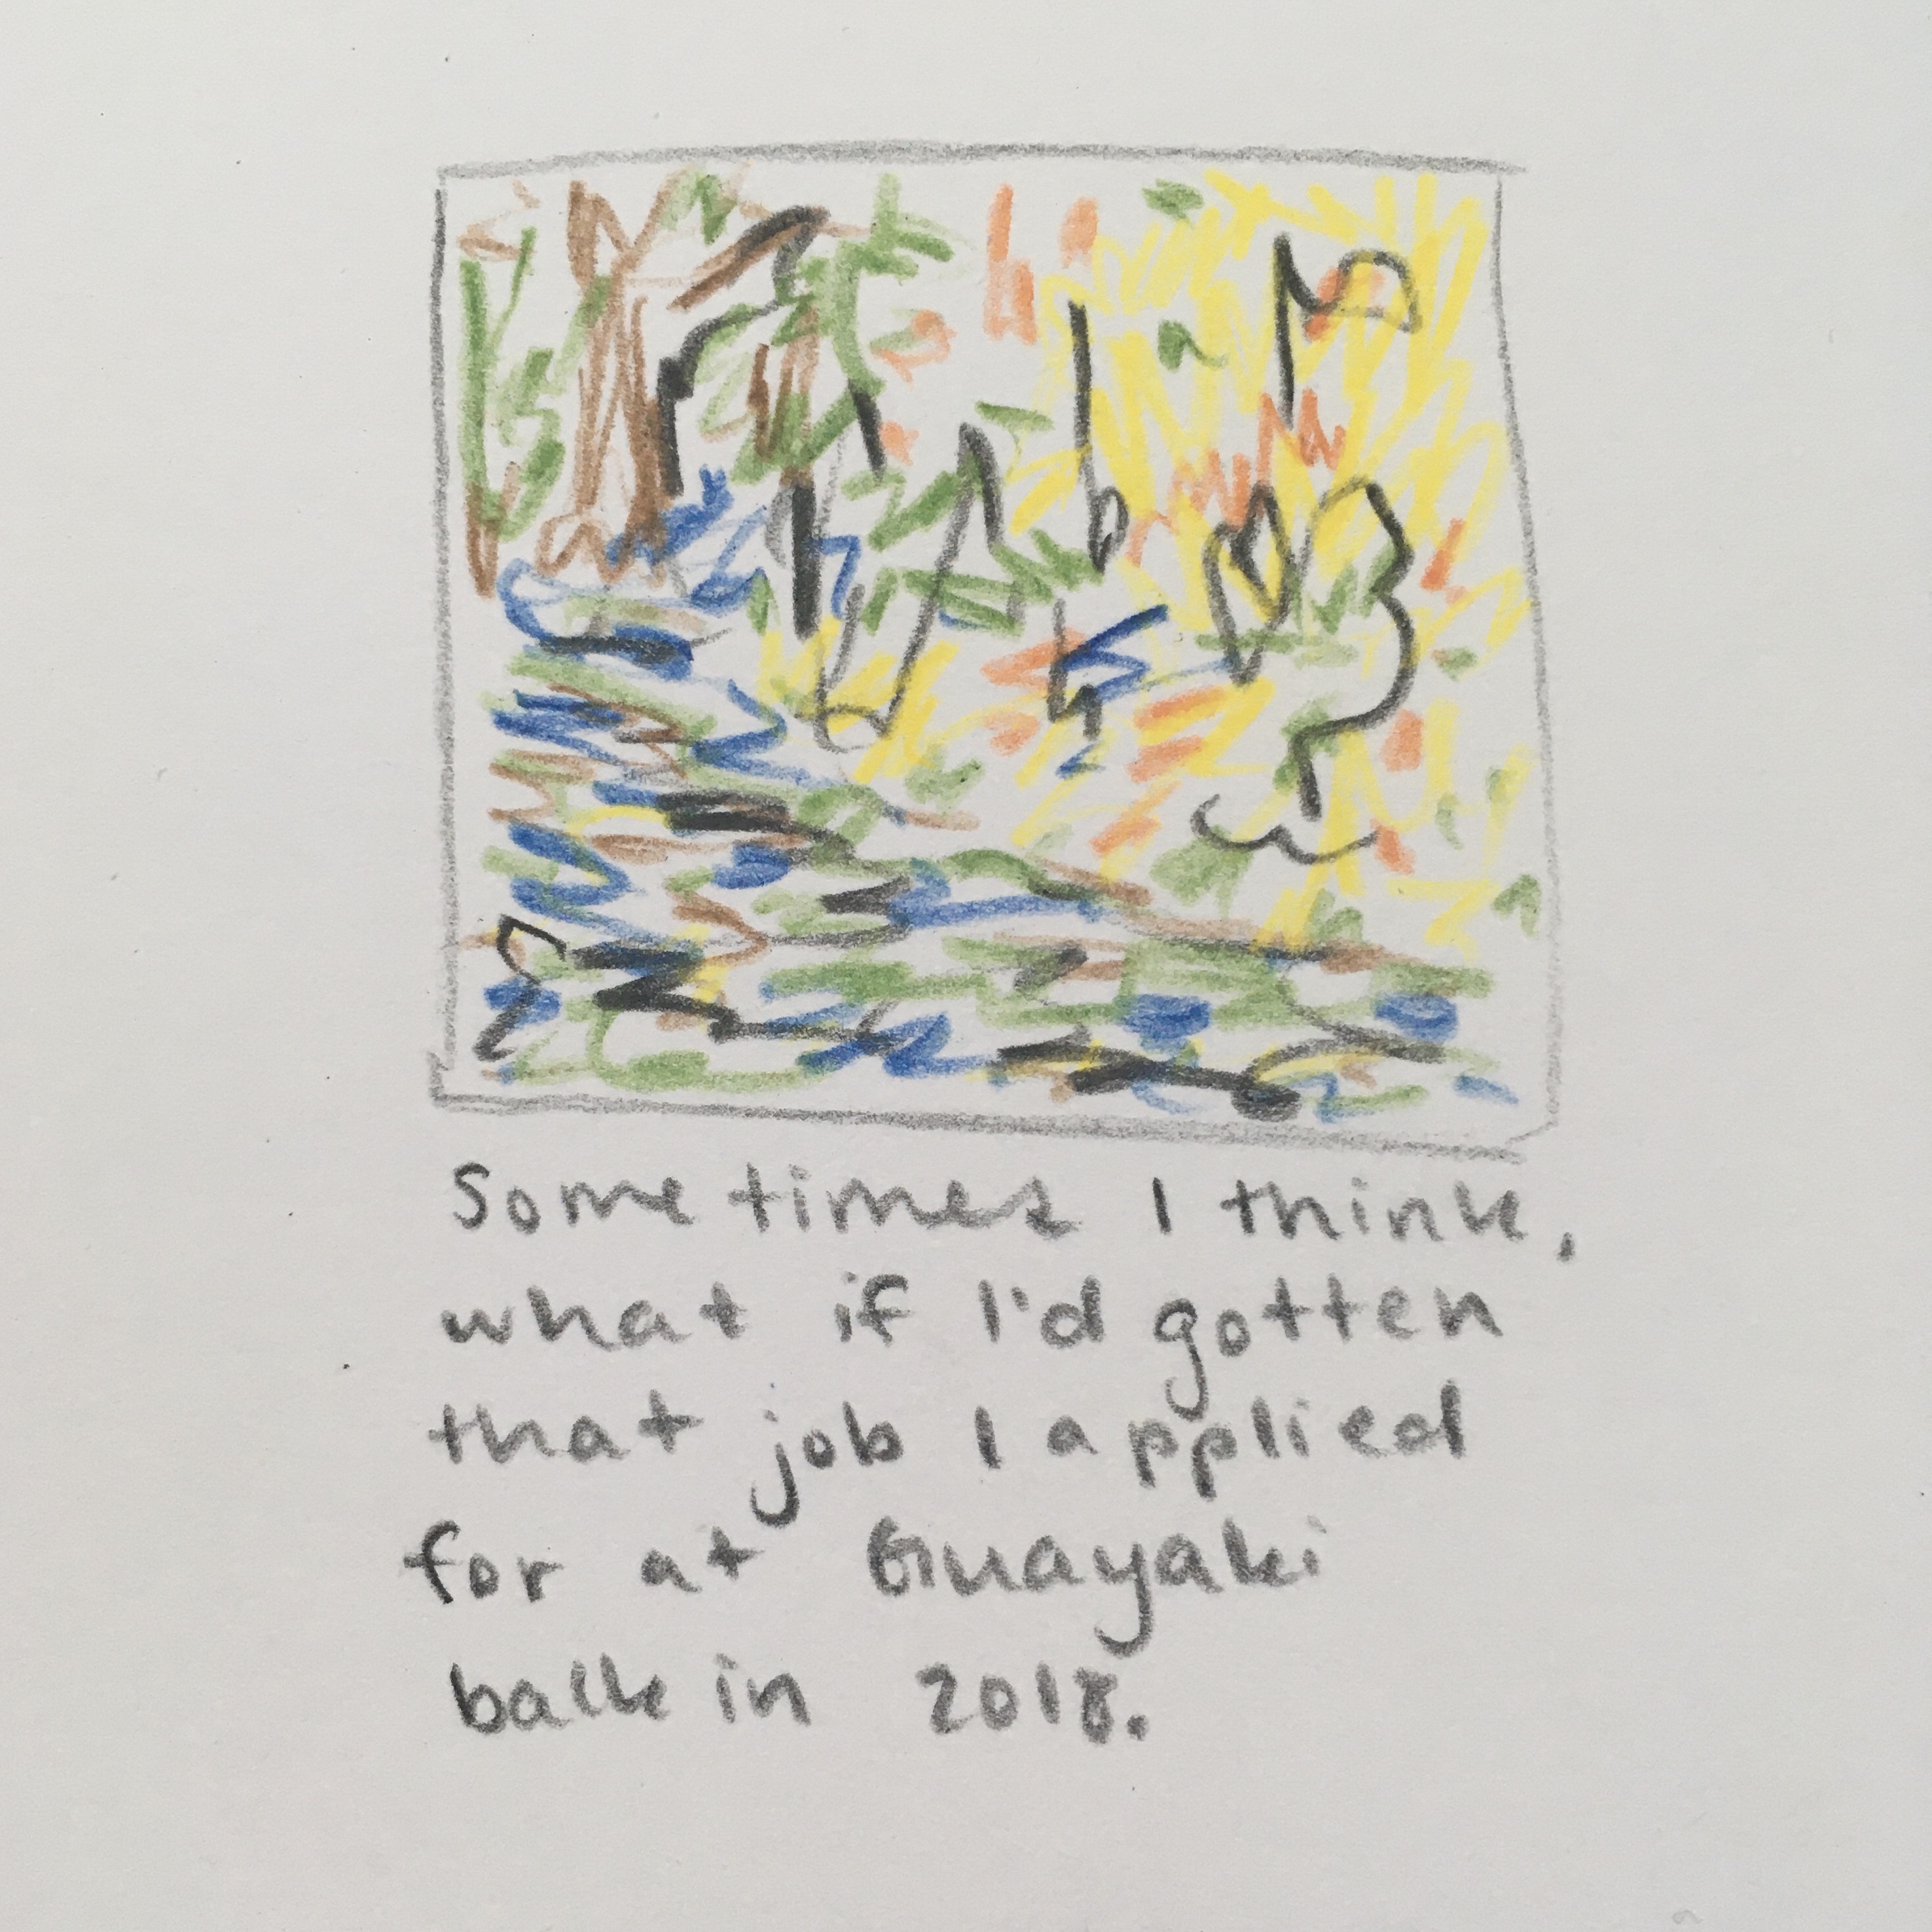 a drawing showing a blurry mess of colors vaguely resembling a yellow guayaki can, a river, and a tree.